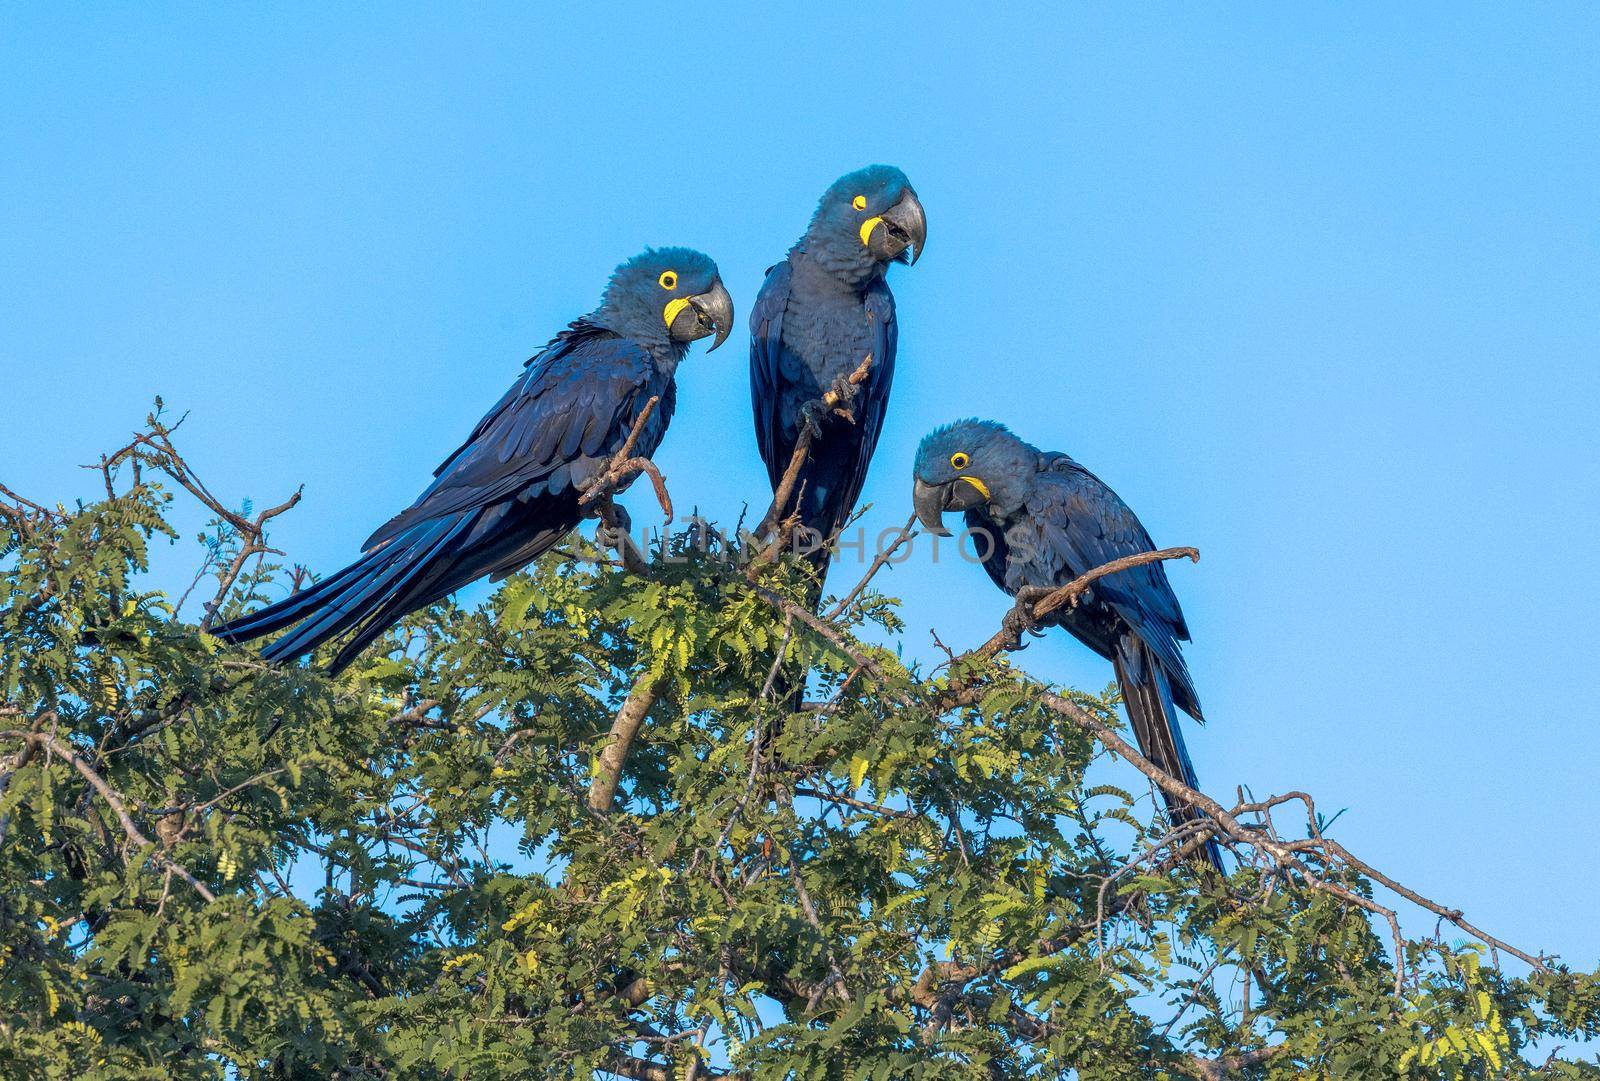 Hyacinth Macaws, Anodorhynchus hyacinthinus, are found in a limited range of South America, mainly in the Pantanal of Brazil and Bolivia. Their population is threatened by habitat loss, the pet trade and mechanized agriculture.